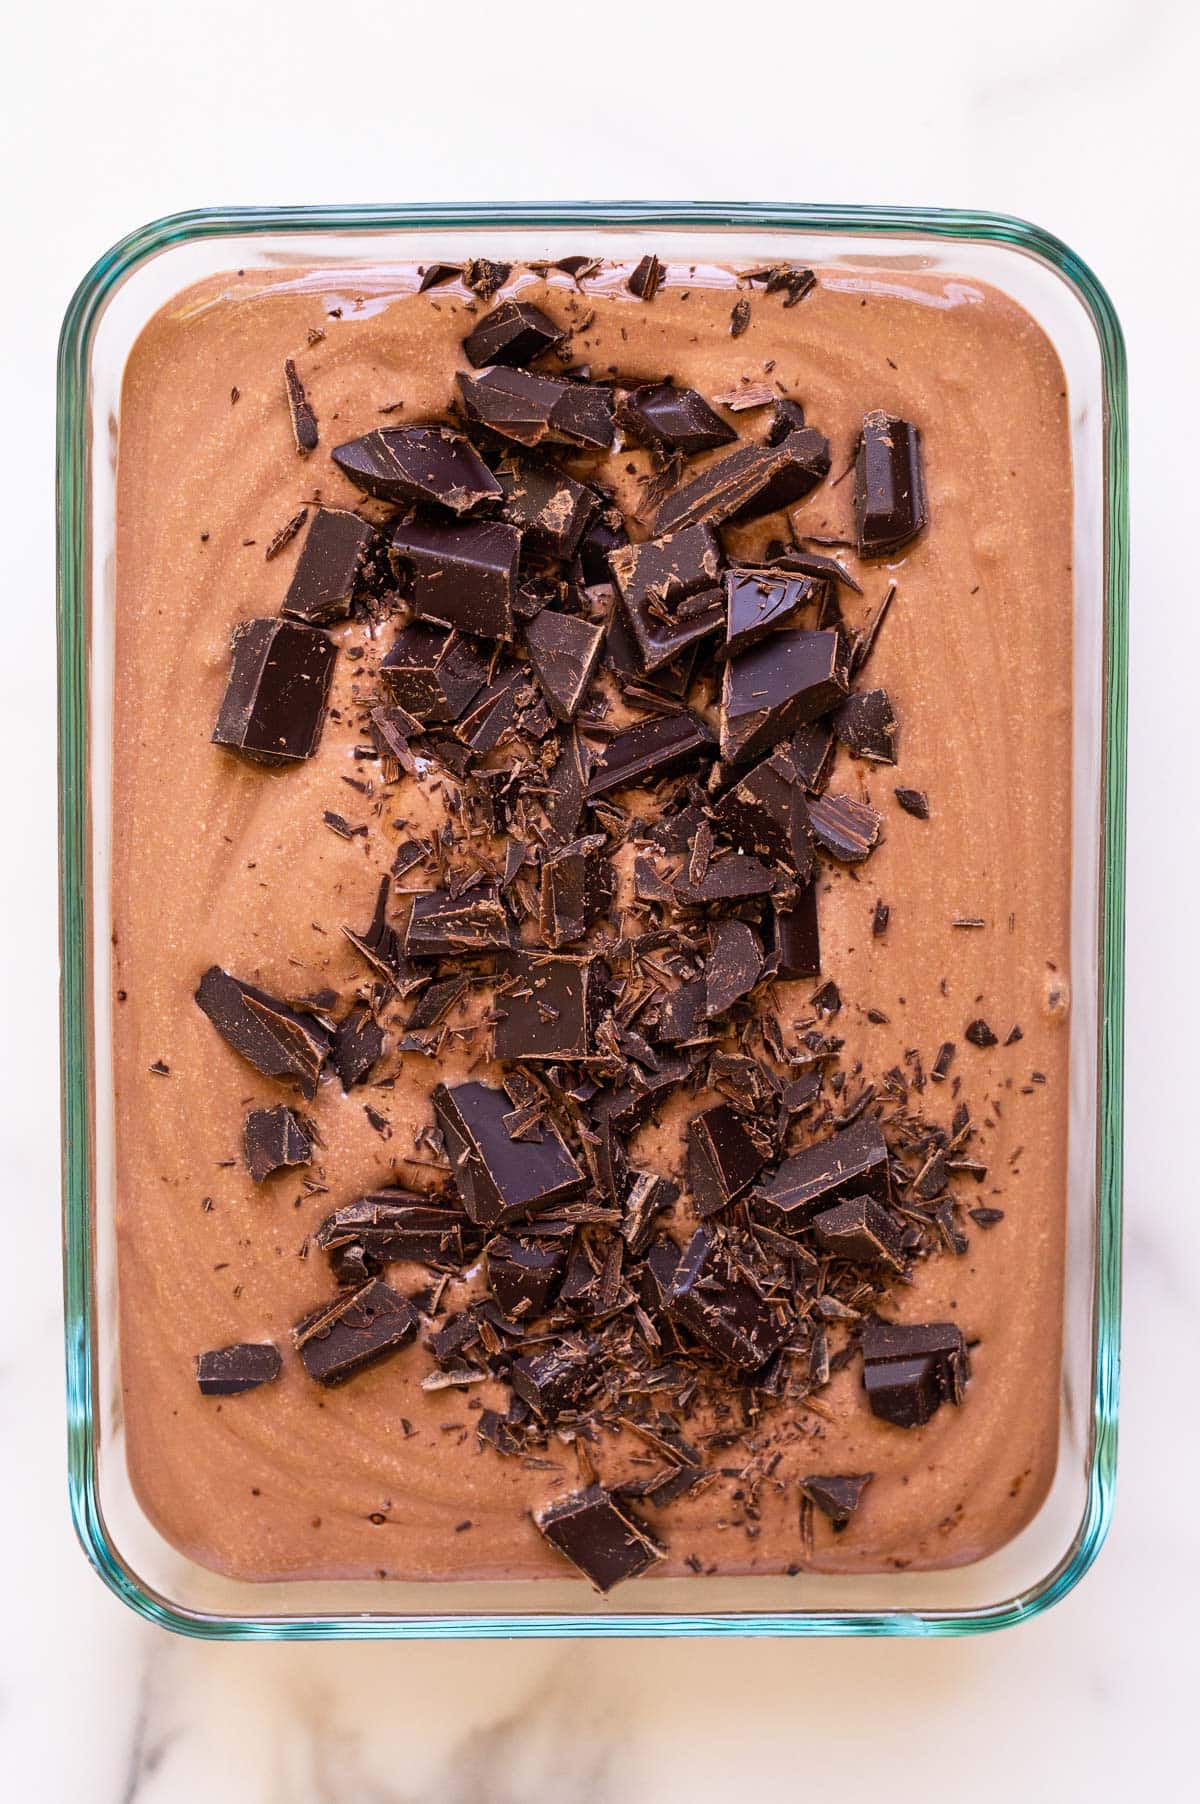 Chocolate cottage cheese ice cream topped with chopped chocolate bar in a glass container before freezing.